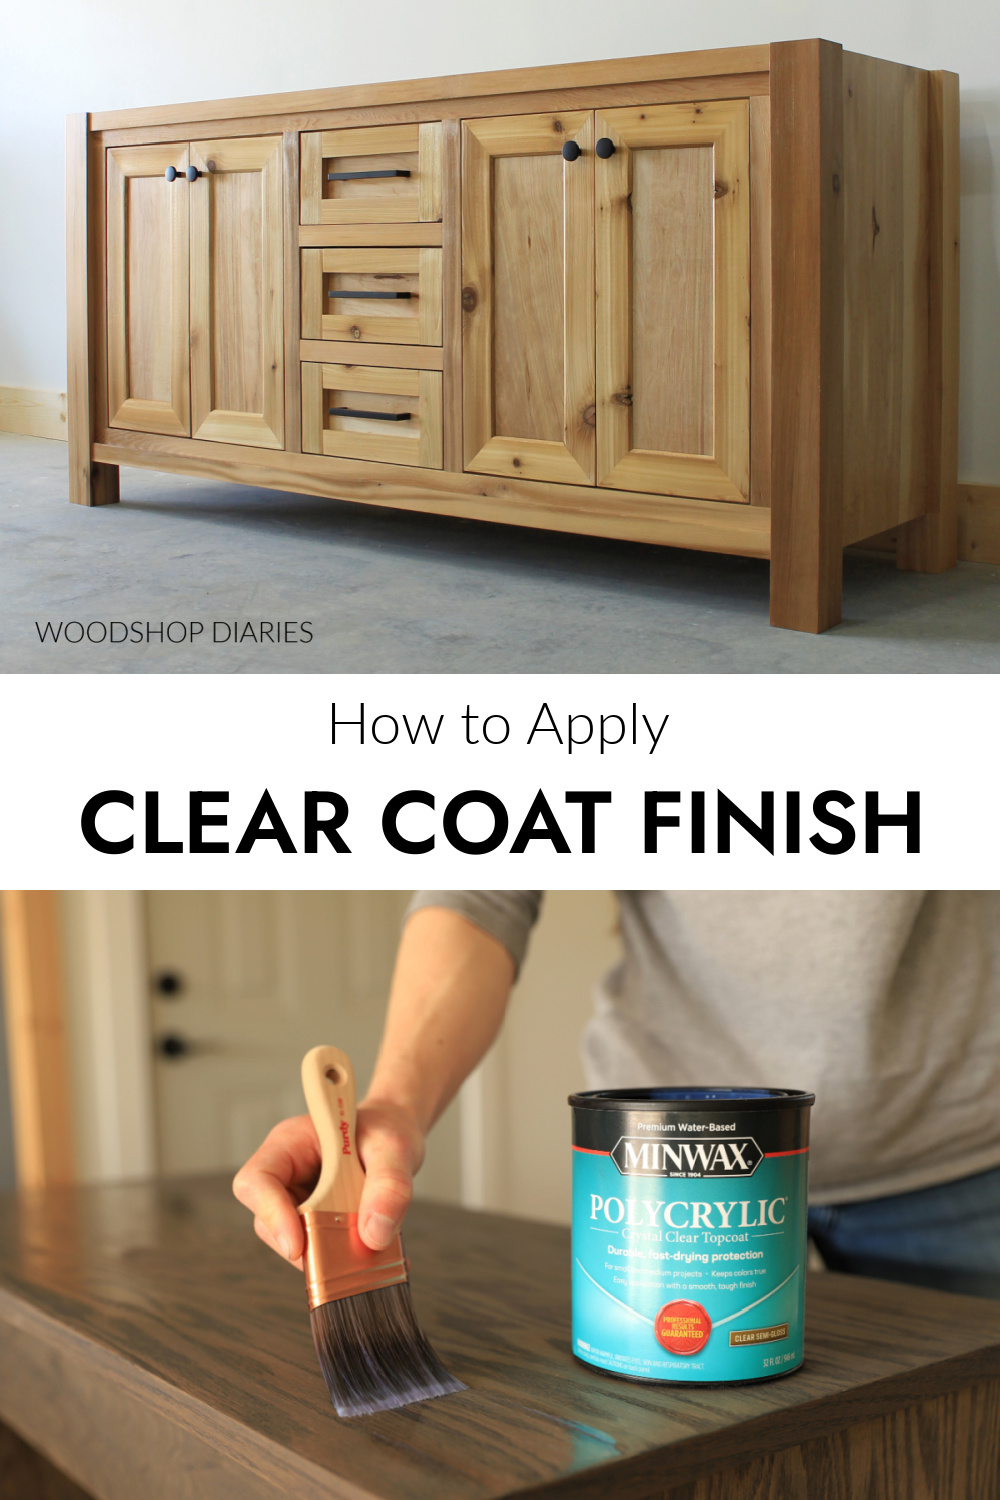 Pinterest collage image showing clear finished vanity at top and applying Minwax Polycrylic on bottom with text "how to apply clear coat finish"